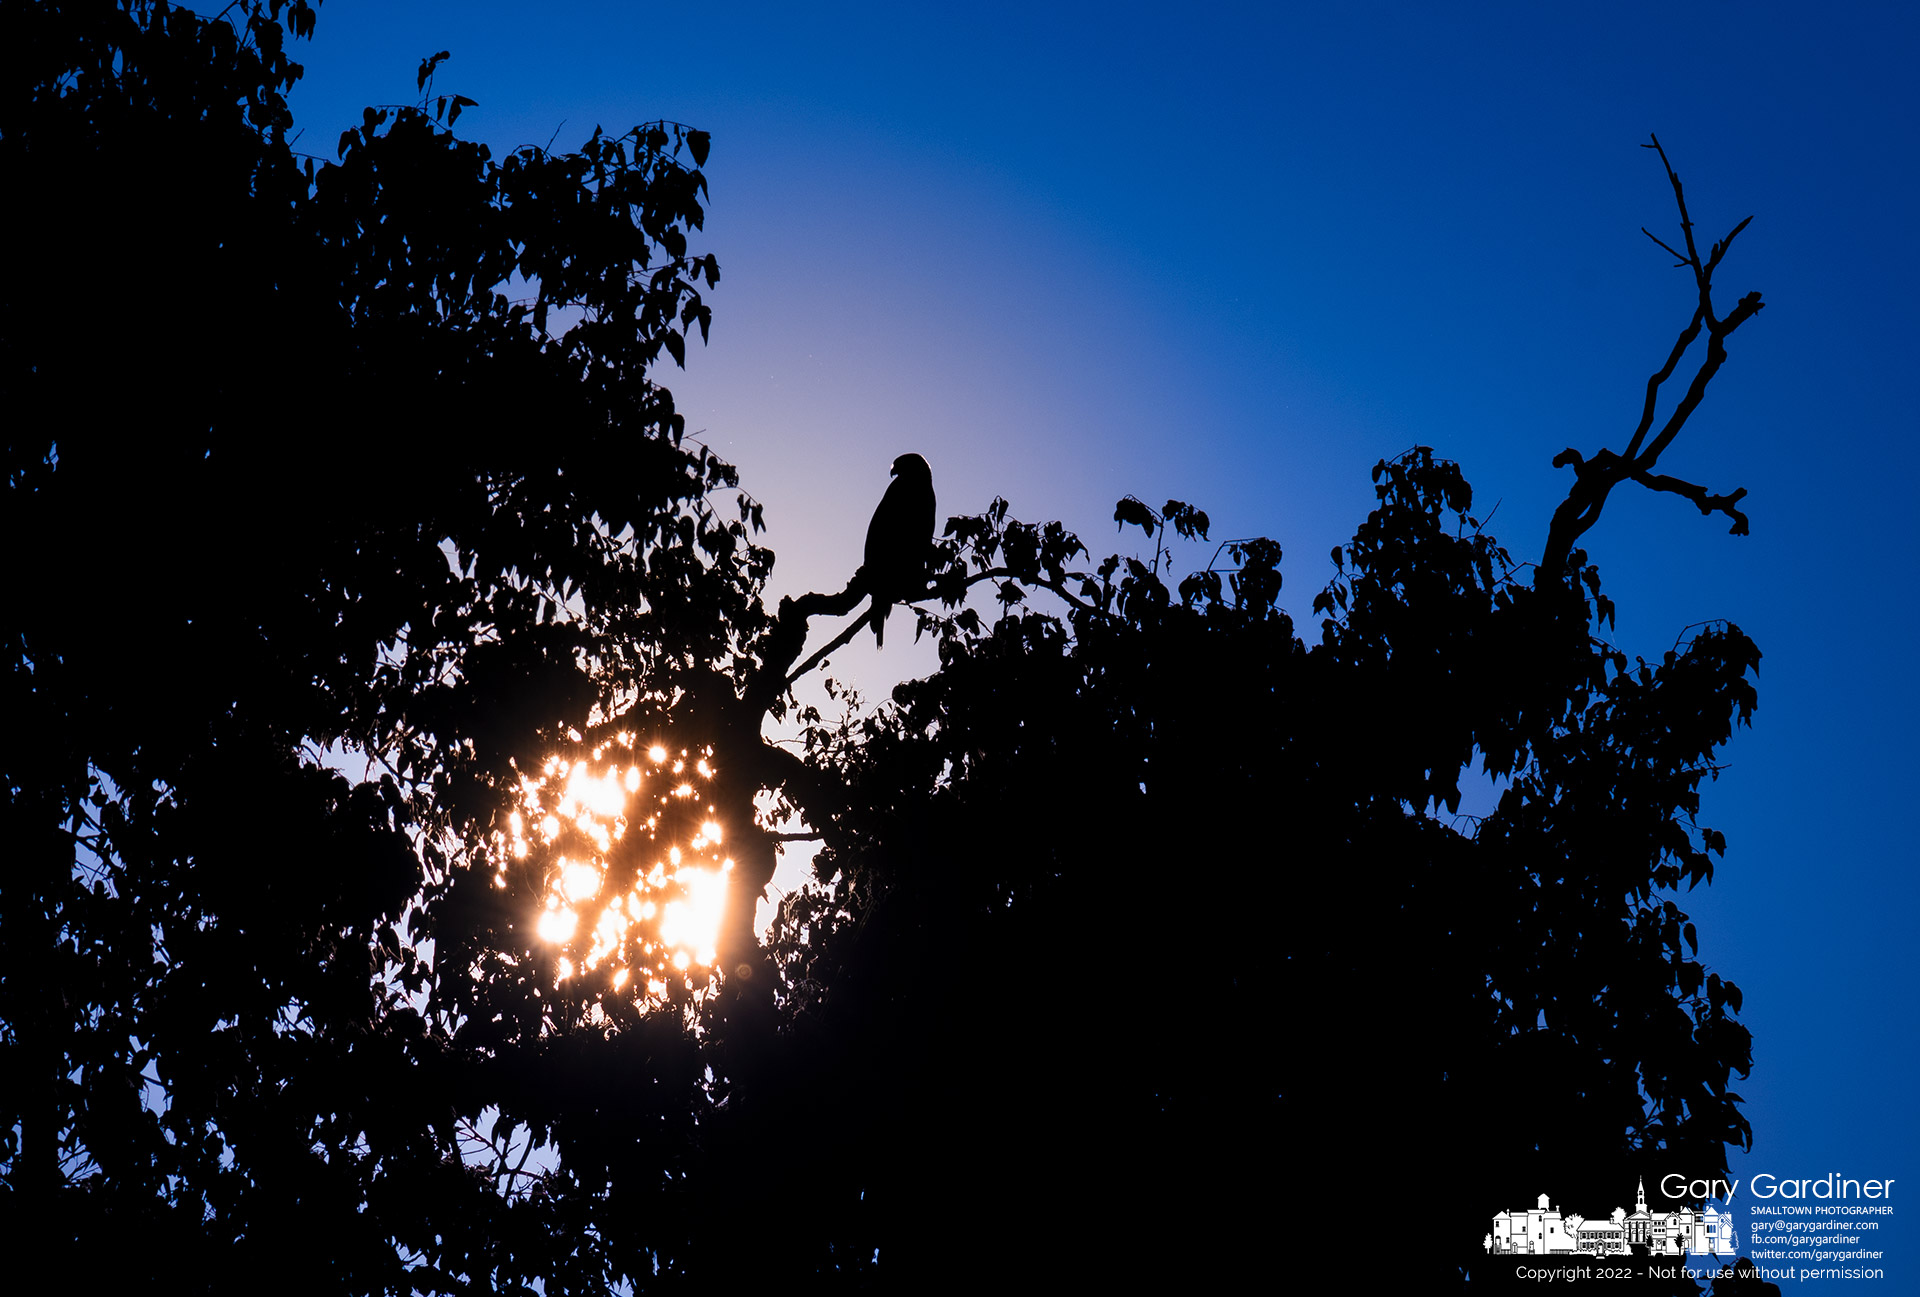 A hawk surveys the field at Cooper Road and Collegeview searching for prey in light from the setting sun. My Final Photo for August 2, 2022.